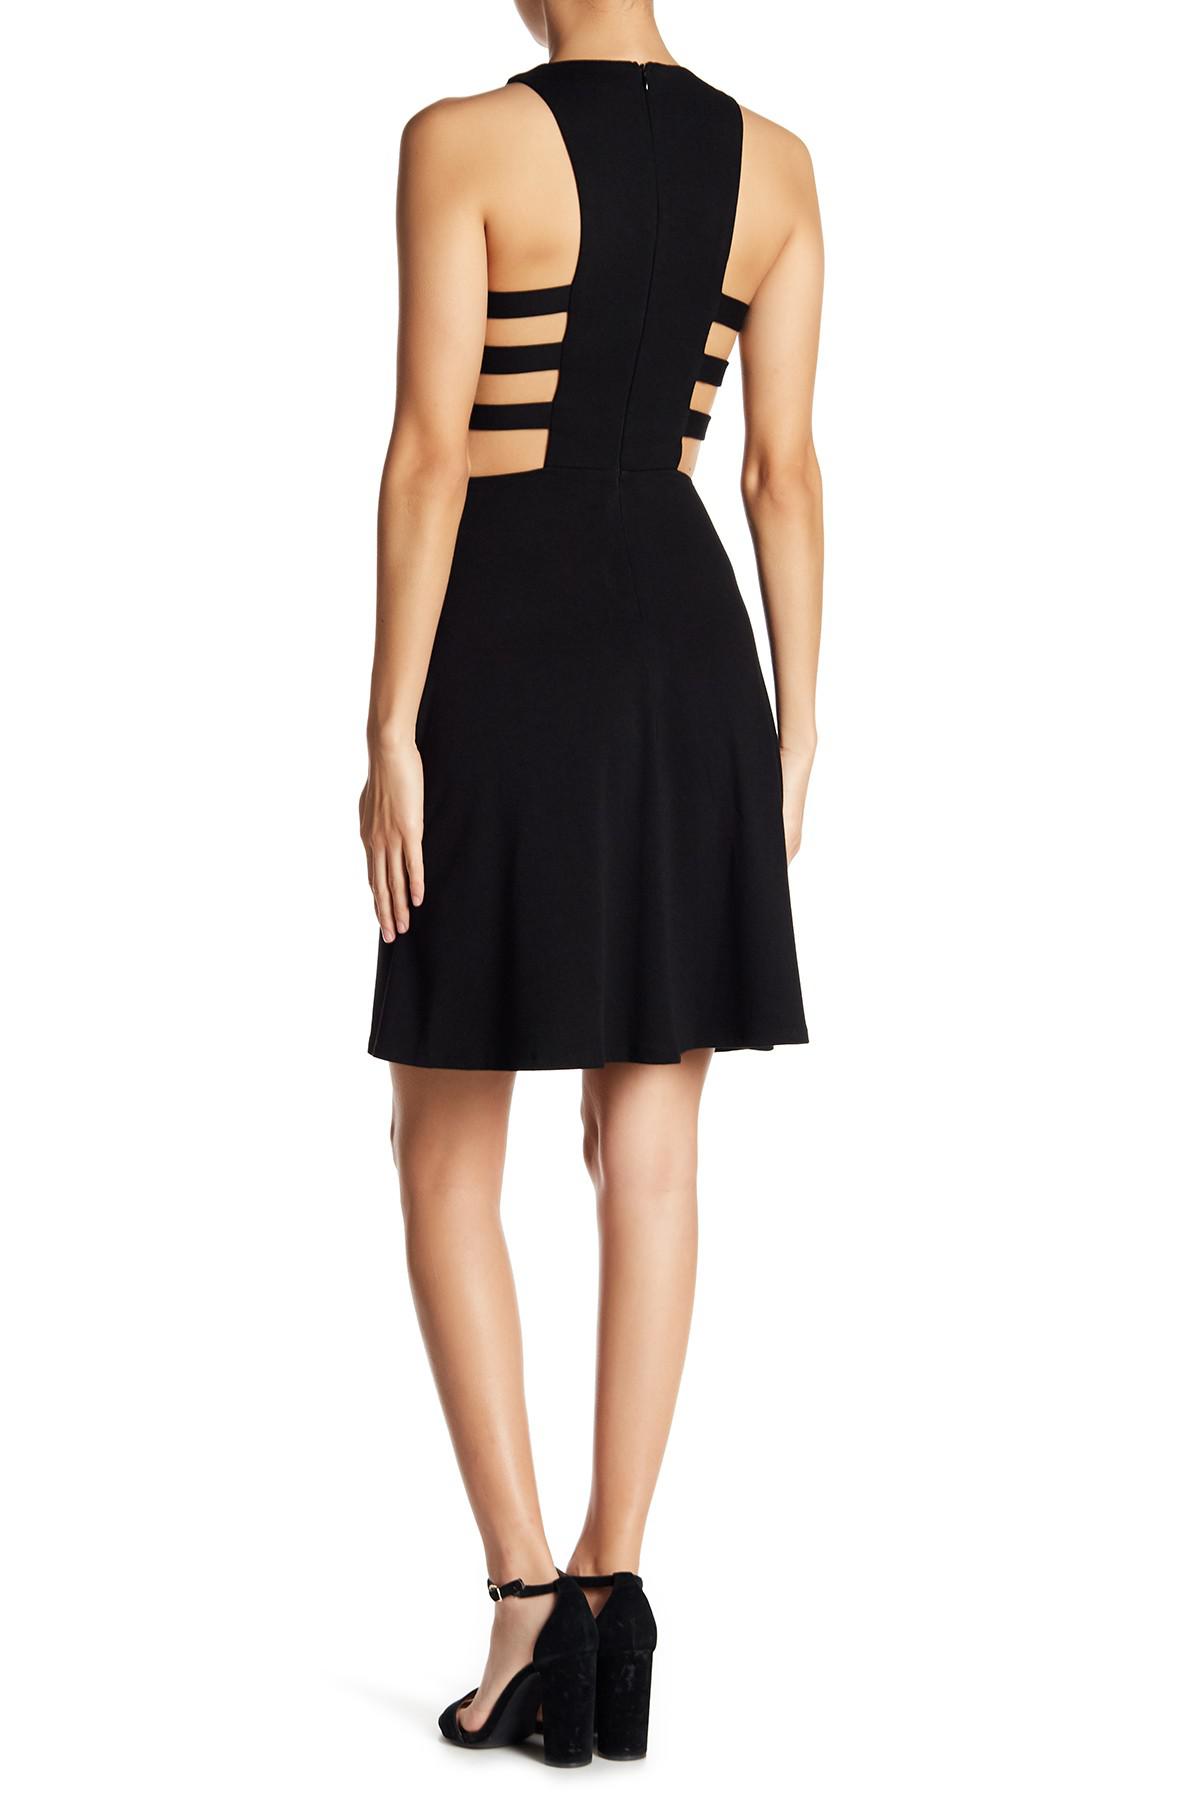 Download Soprano Synthetic Side Cutout Skater Dress in Black - Lyst